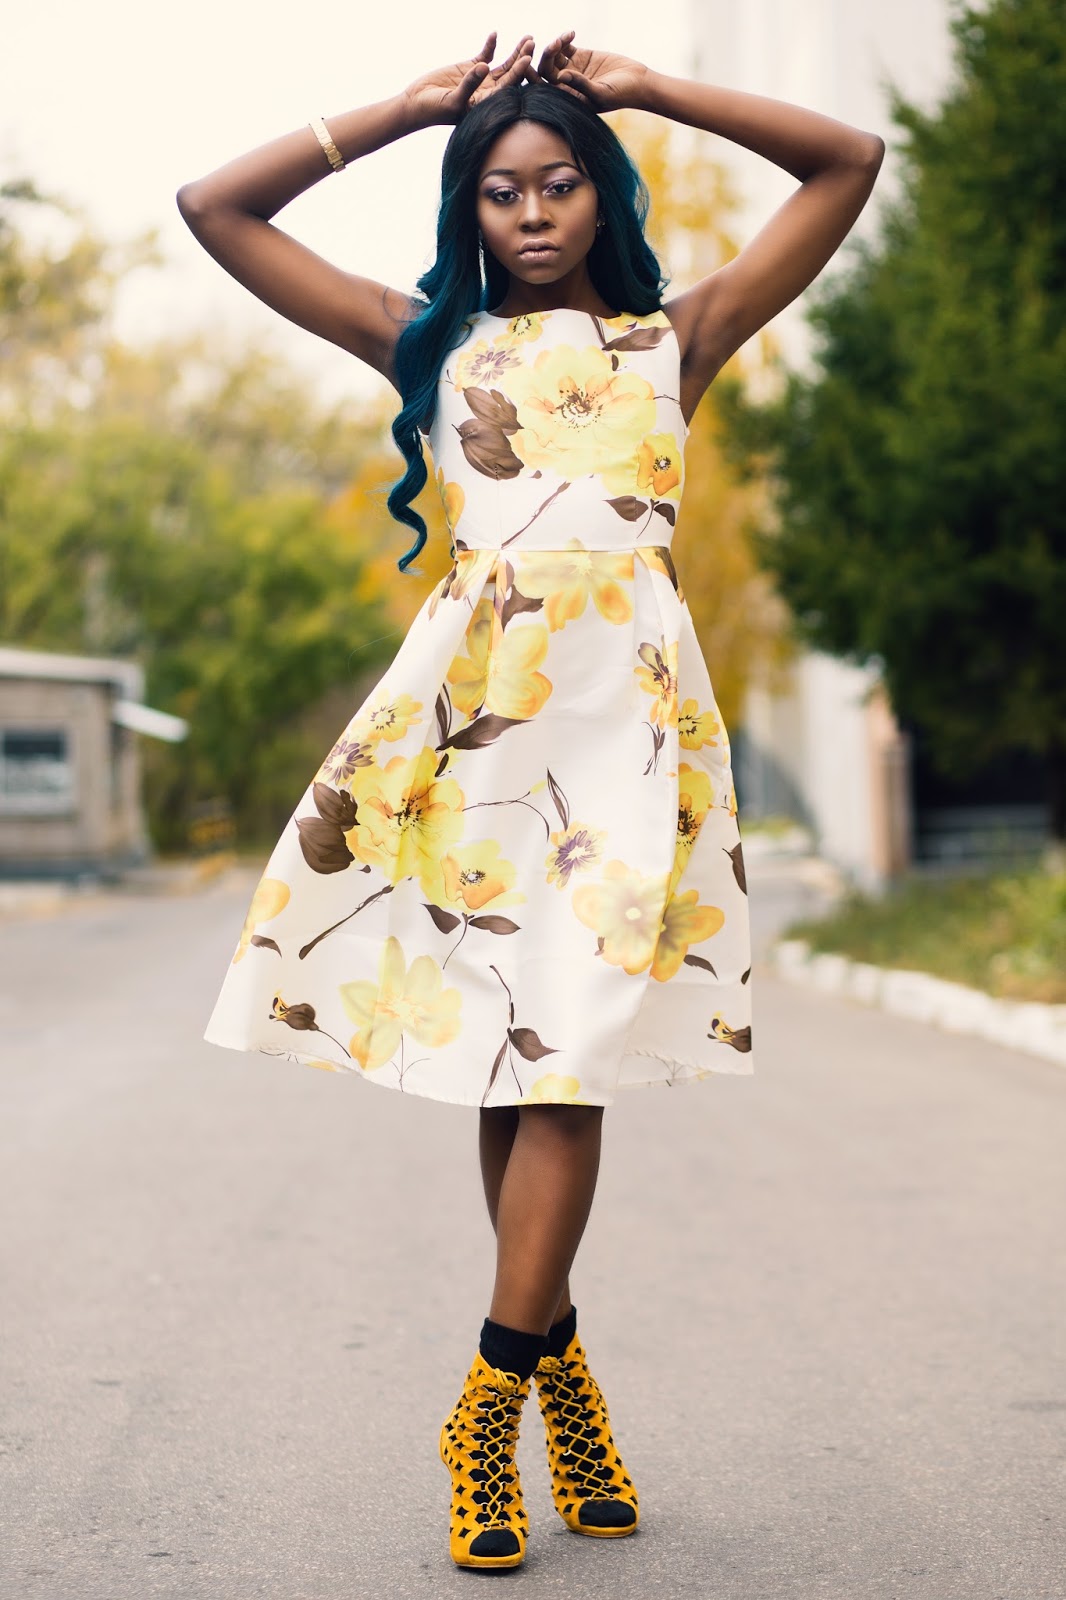 ZAFUL FIT AND FLARE YELLOW FLORAL SKATER DRESS